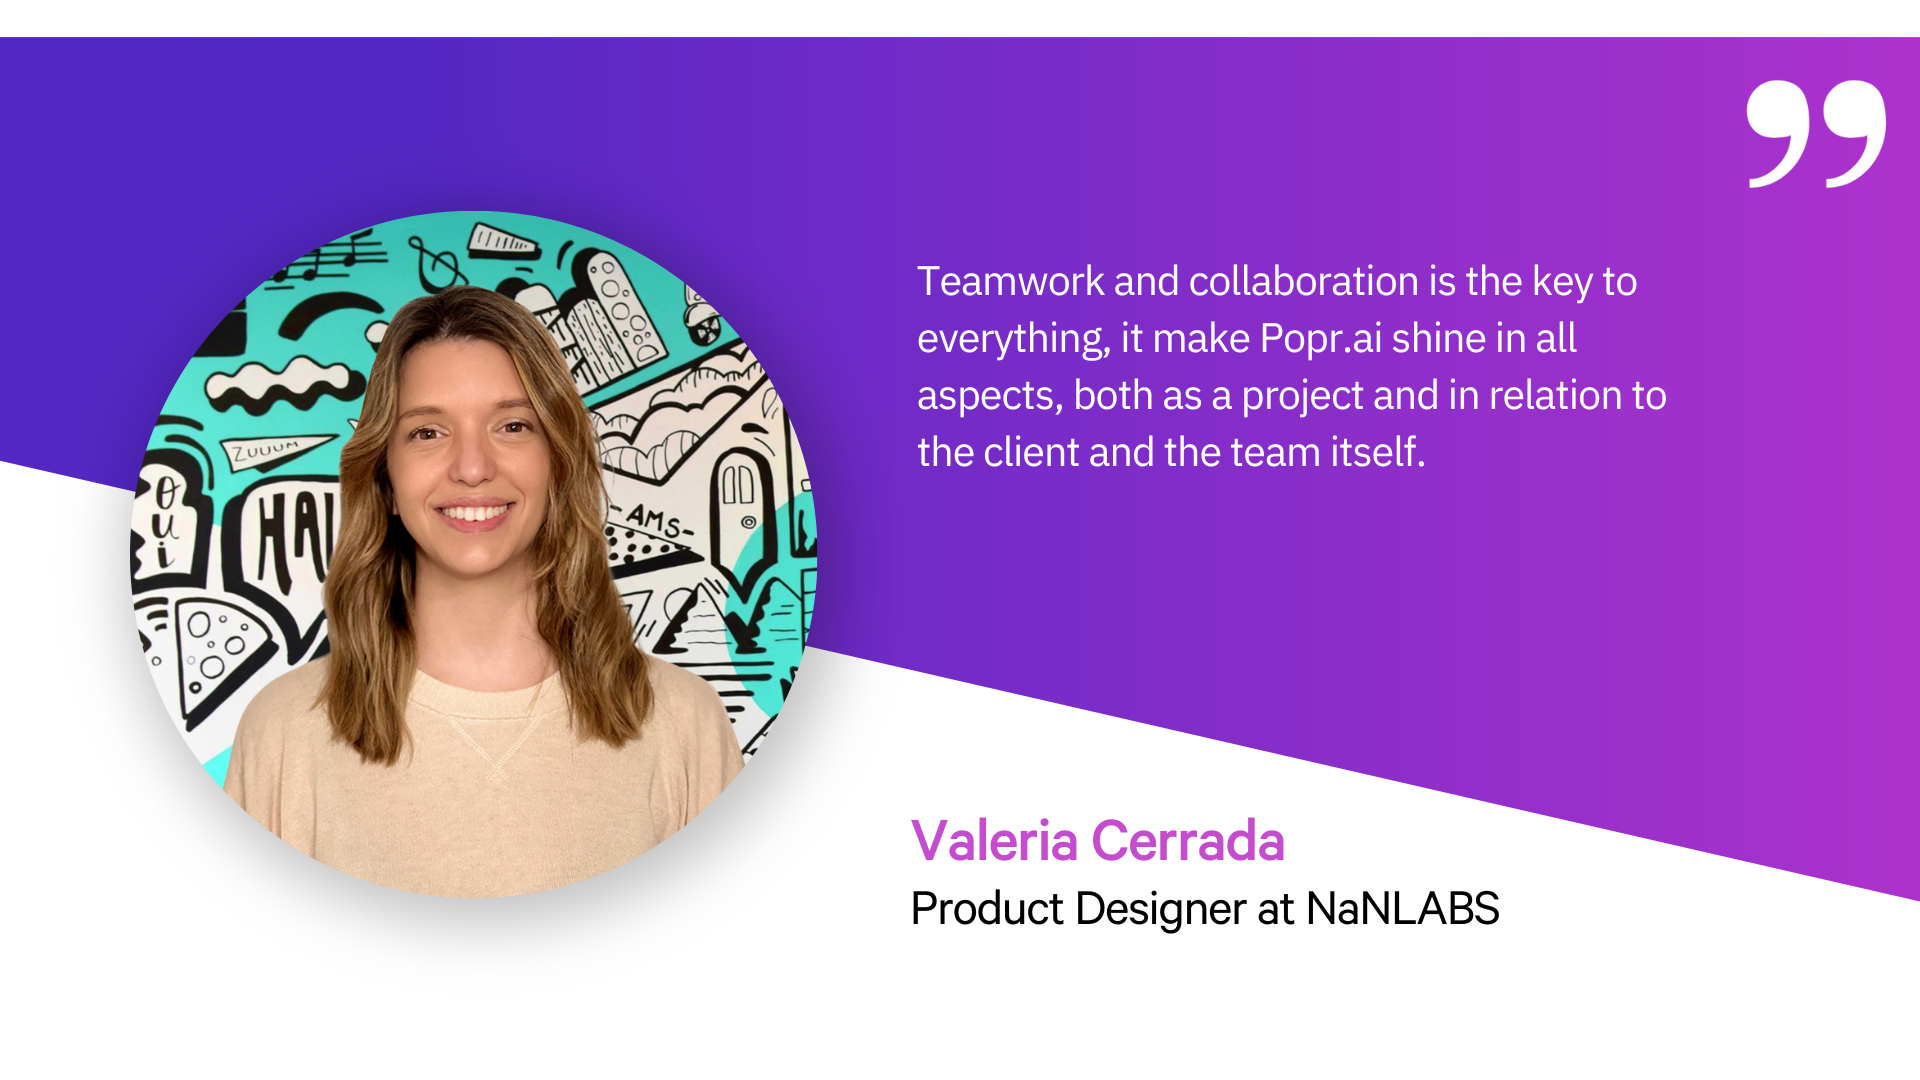 Quote by Valeria Cerrada, product designer at NaNLABS on building MVP for Popr.ai